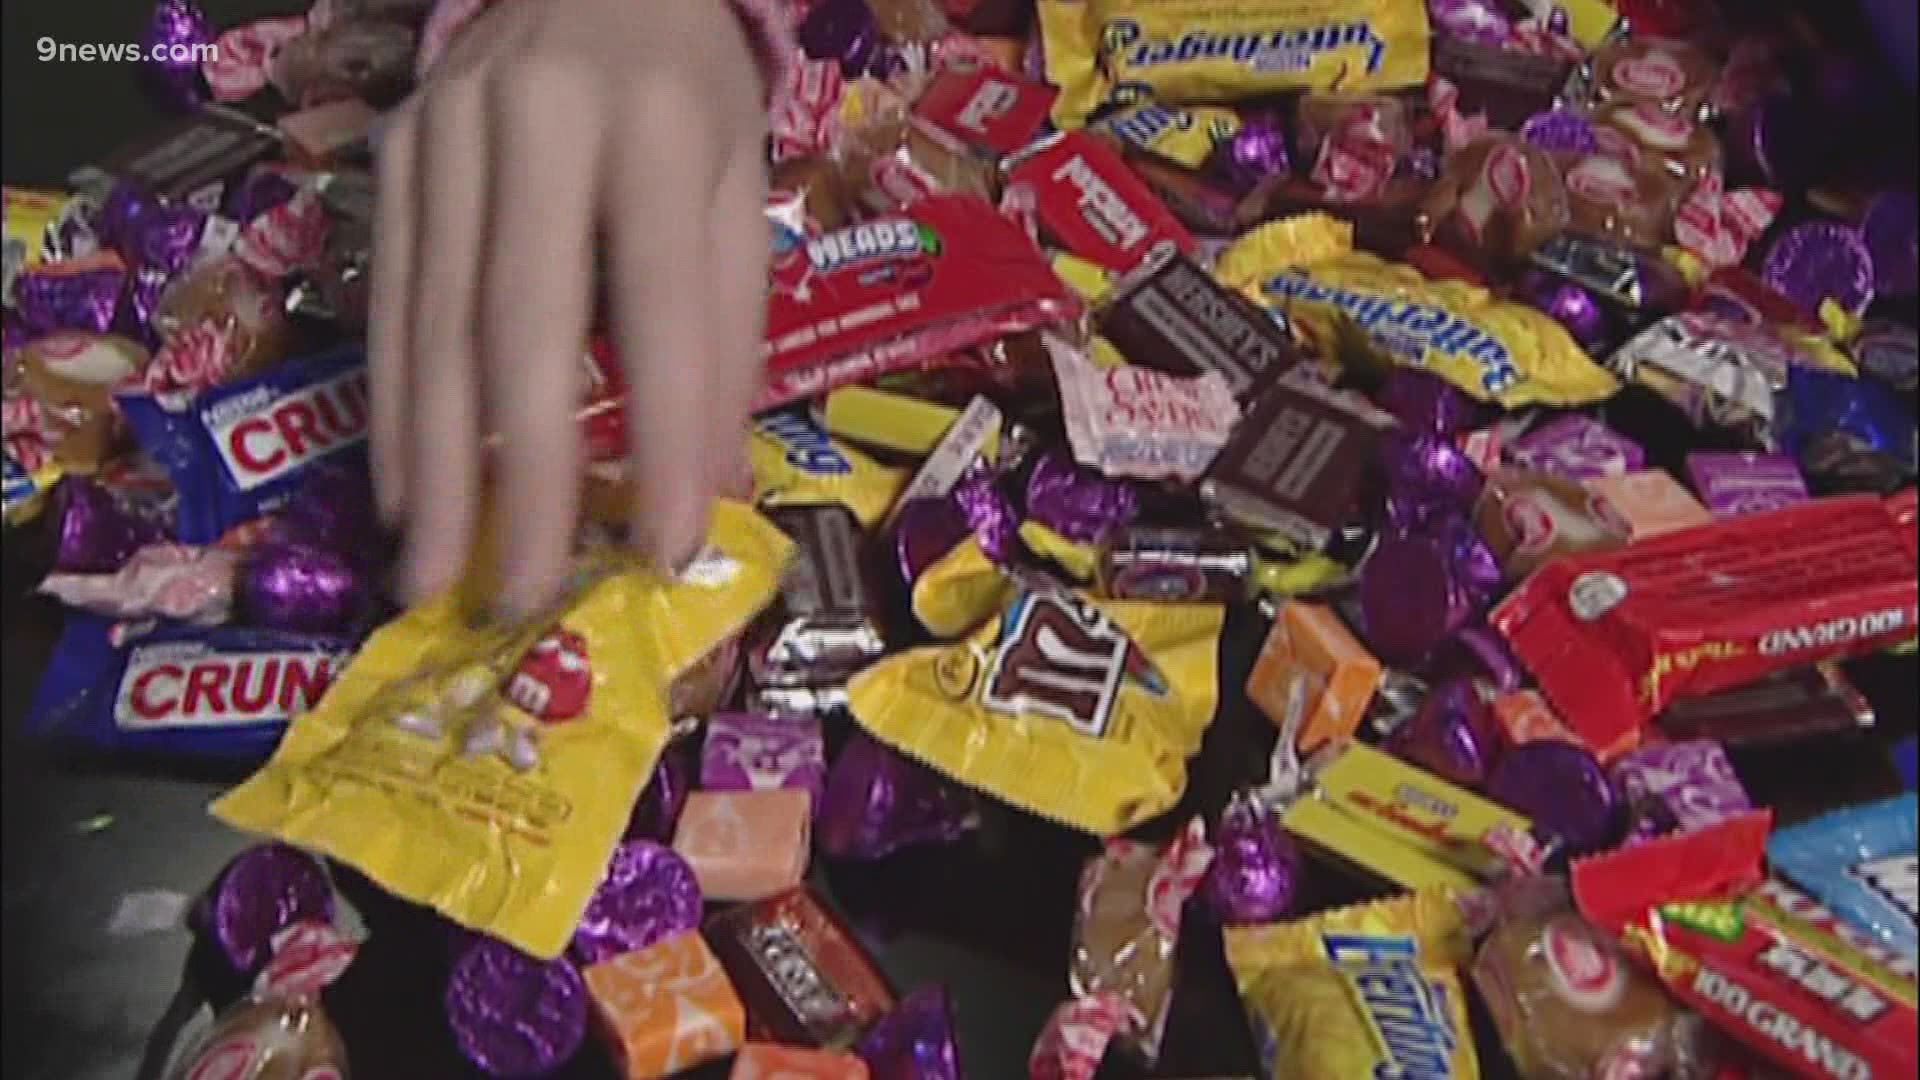 Lower sugar options of traditional candy can be good alternatives this Halloween as 9NEWS nutritionist Kirstin Kirkpatrick explains.